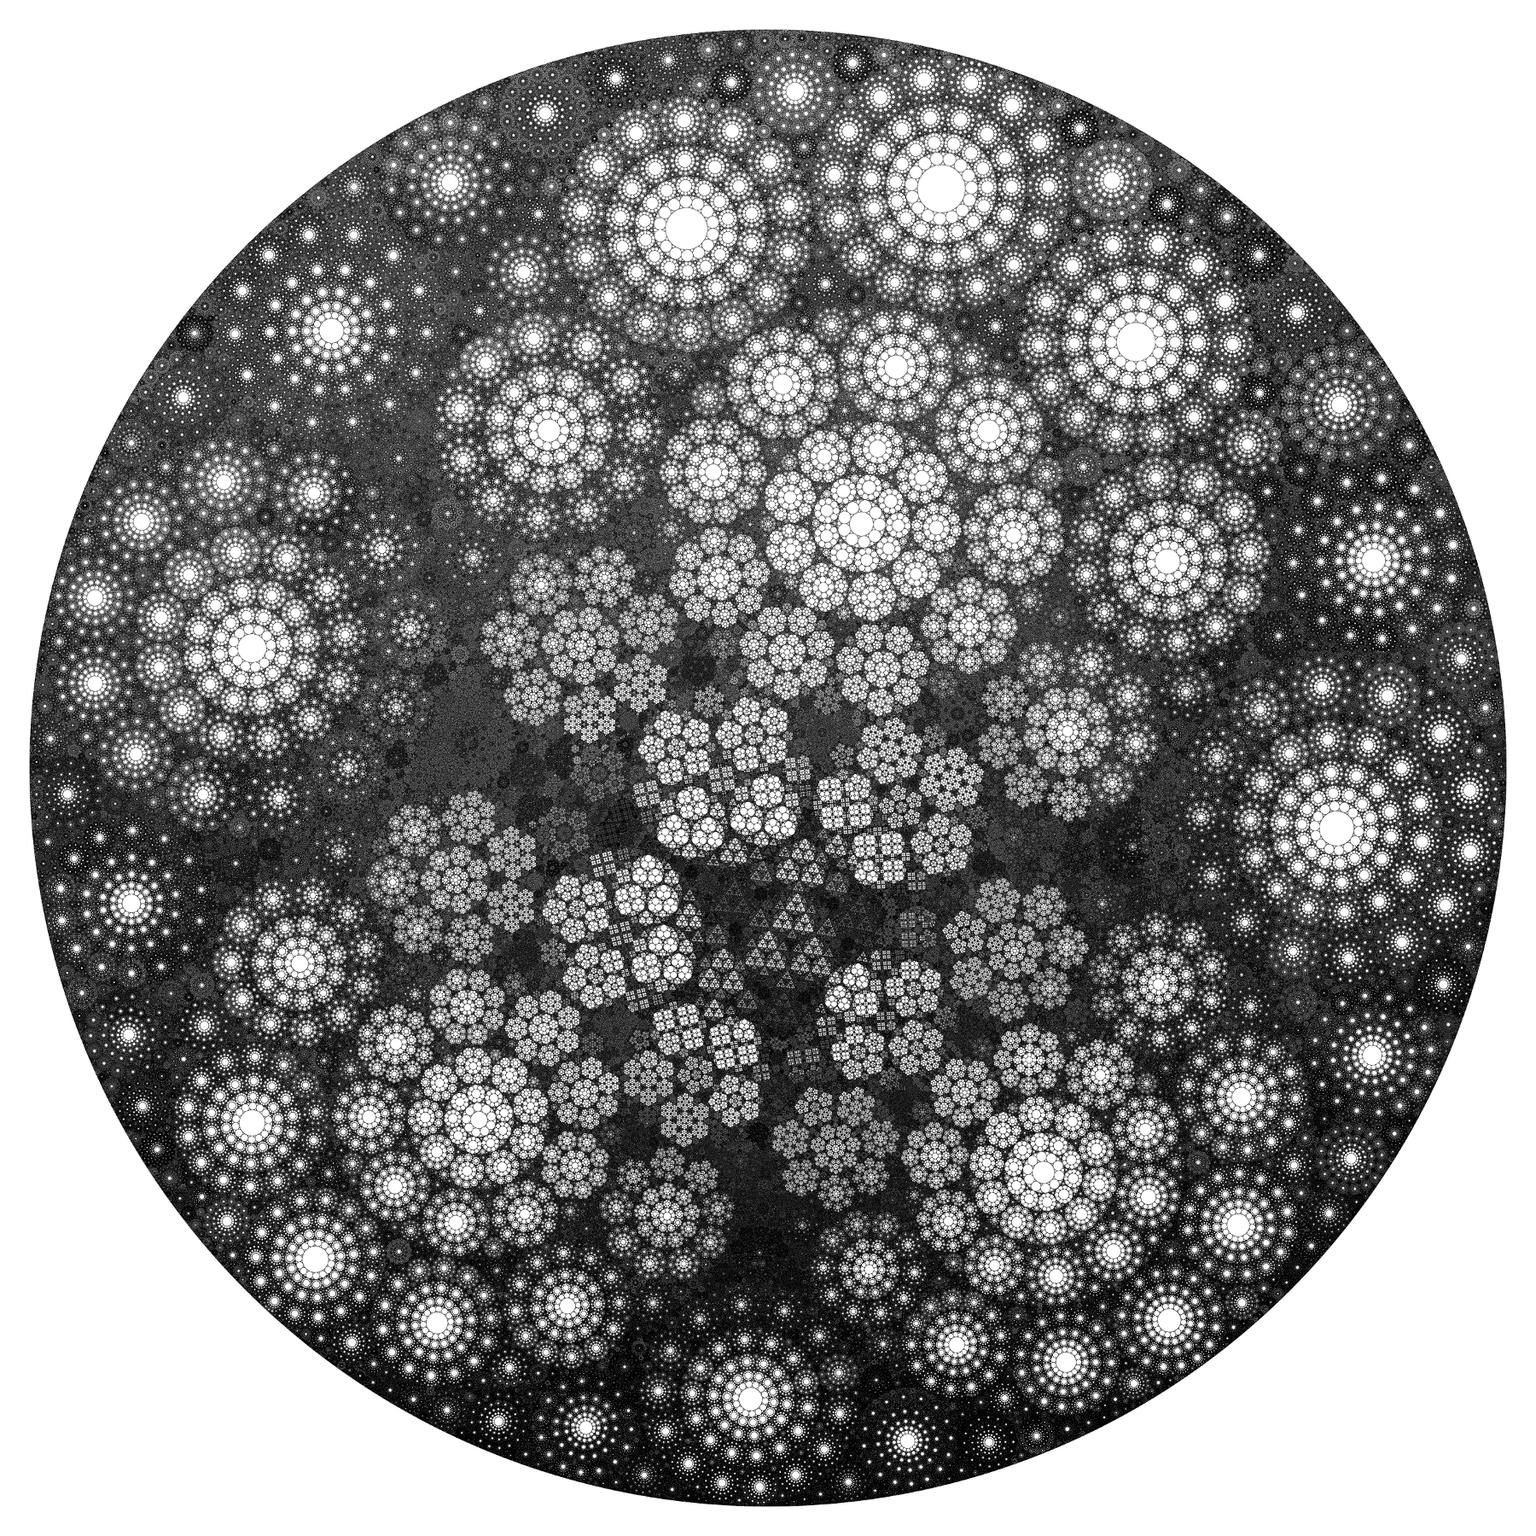 Image for entry 'A catalog of Snowflakes'